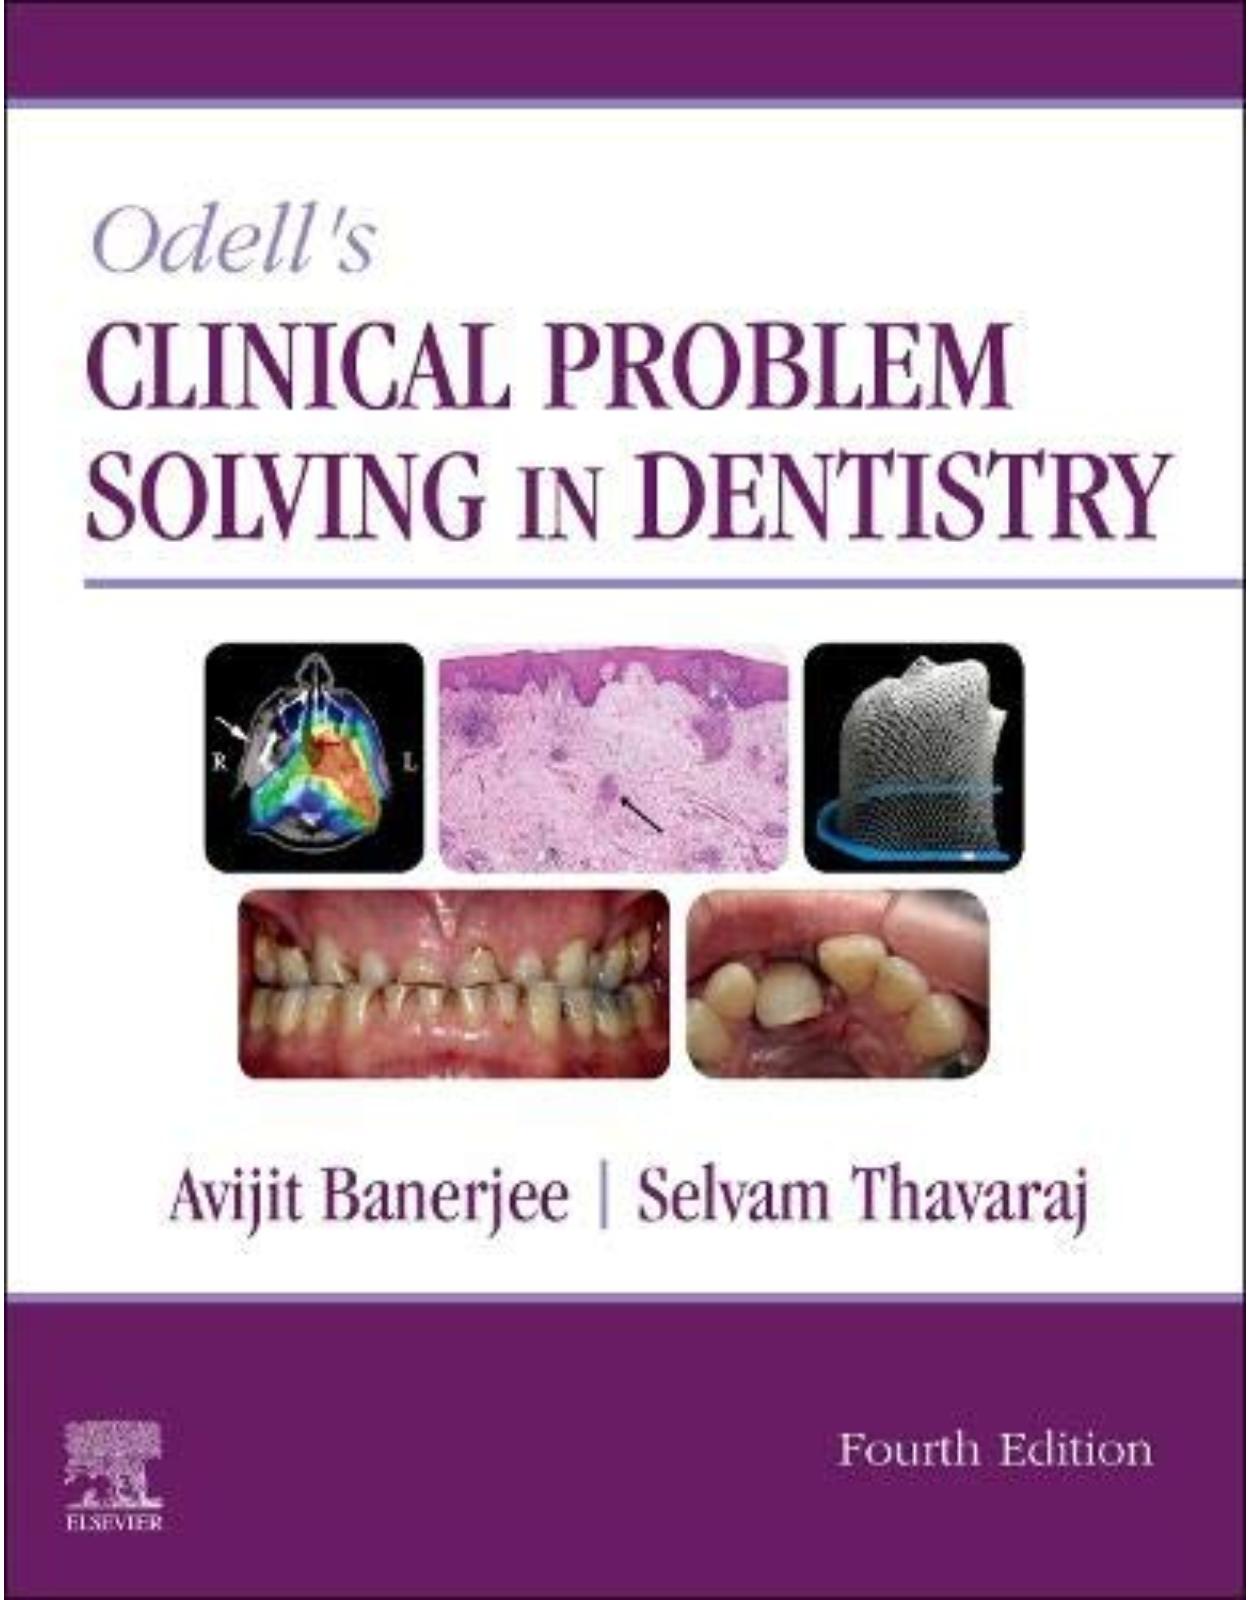 Odell’s Clinical Problem Solving in Dentistry